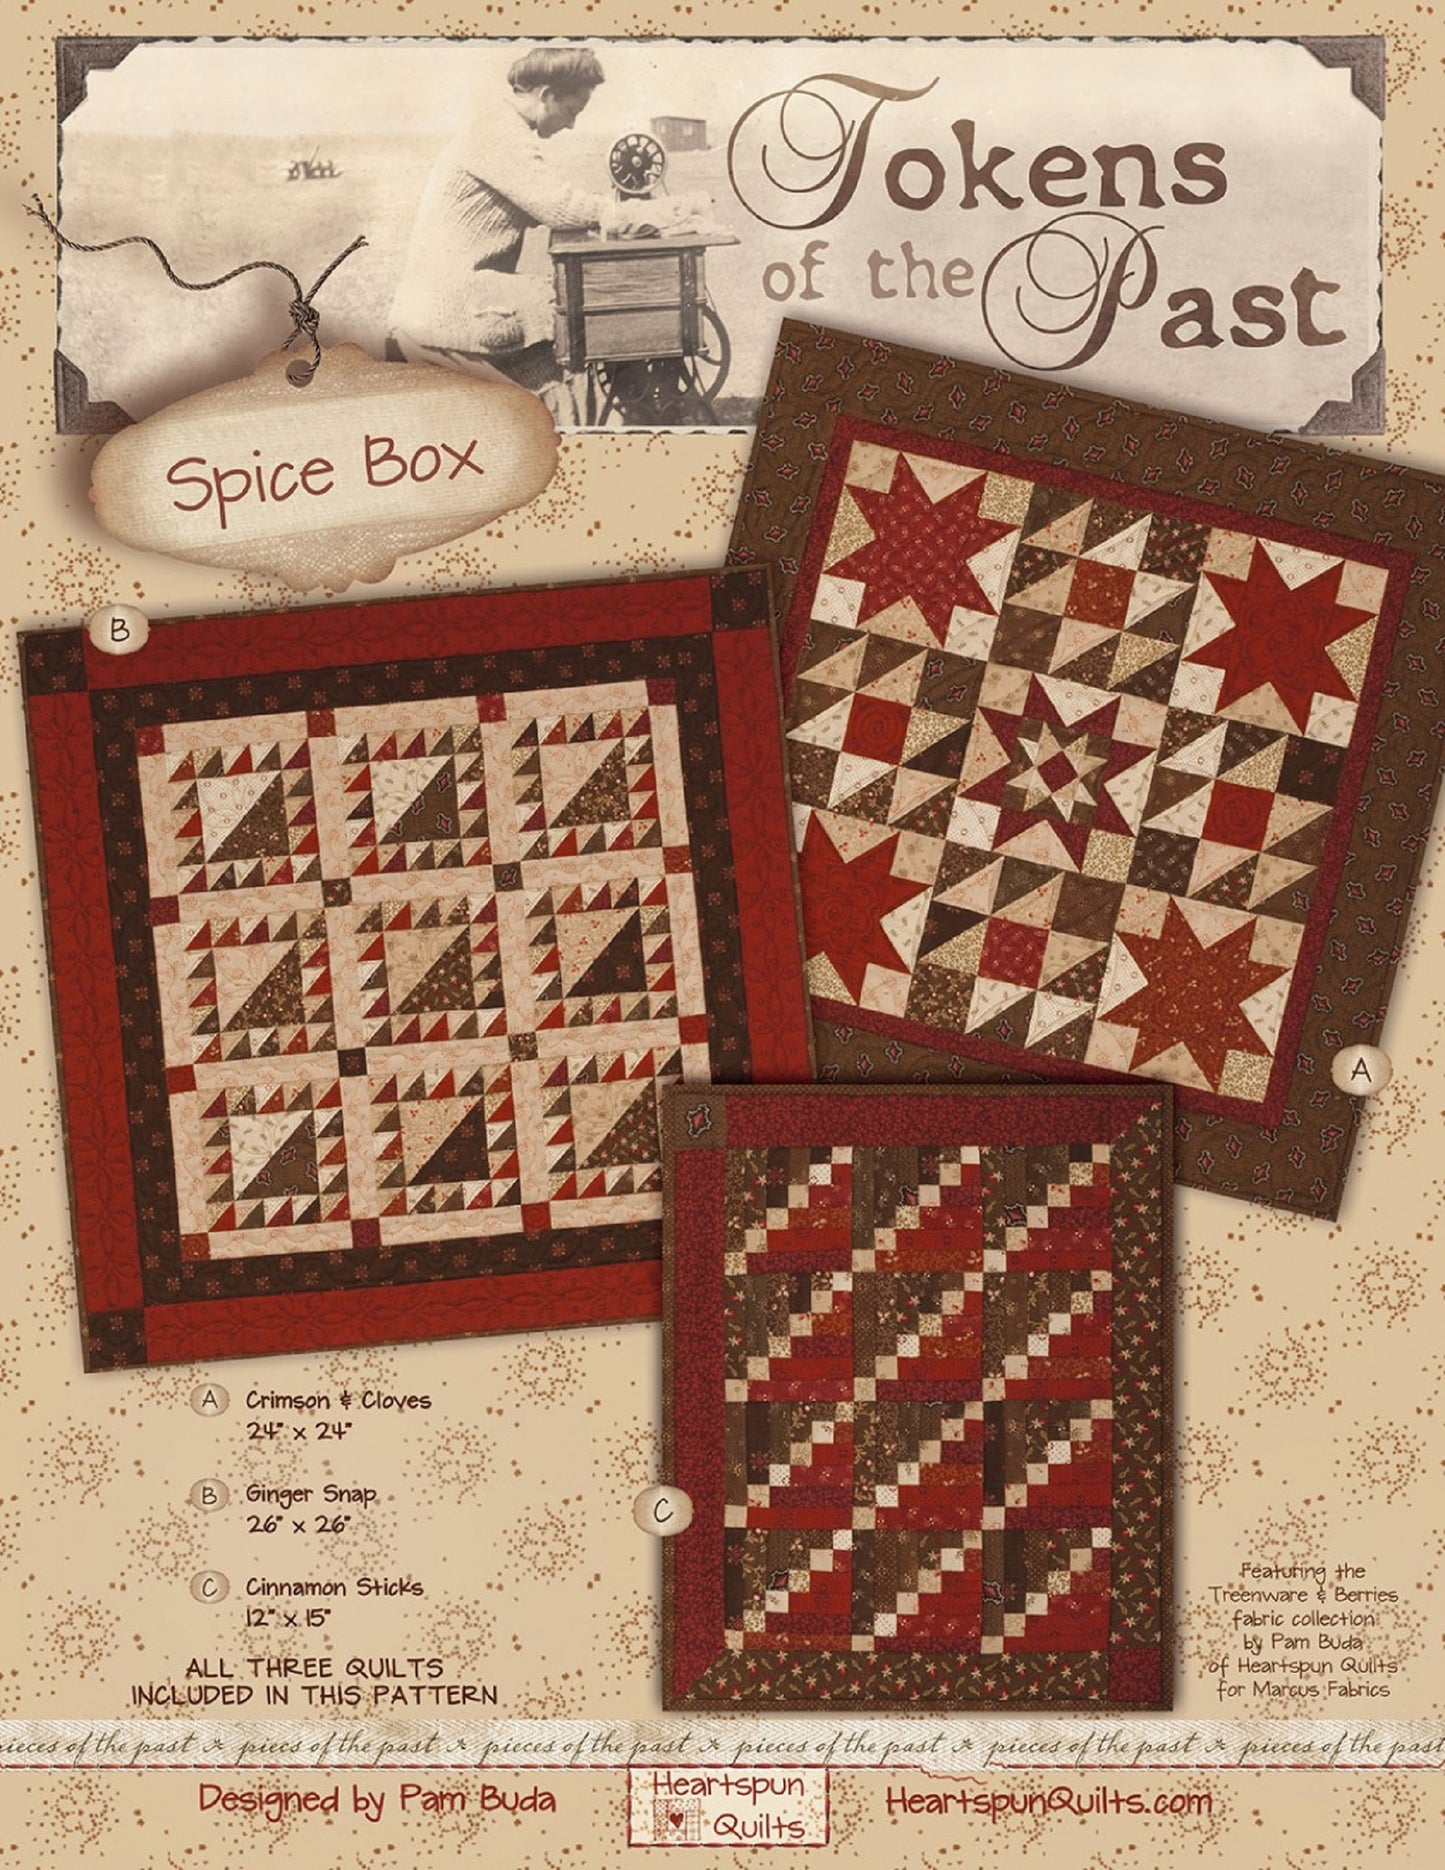 Tokens of the Past-Spice Box Pattern-Heartspun Quilts-3 Quilt Patterns